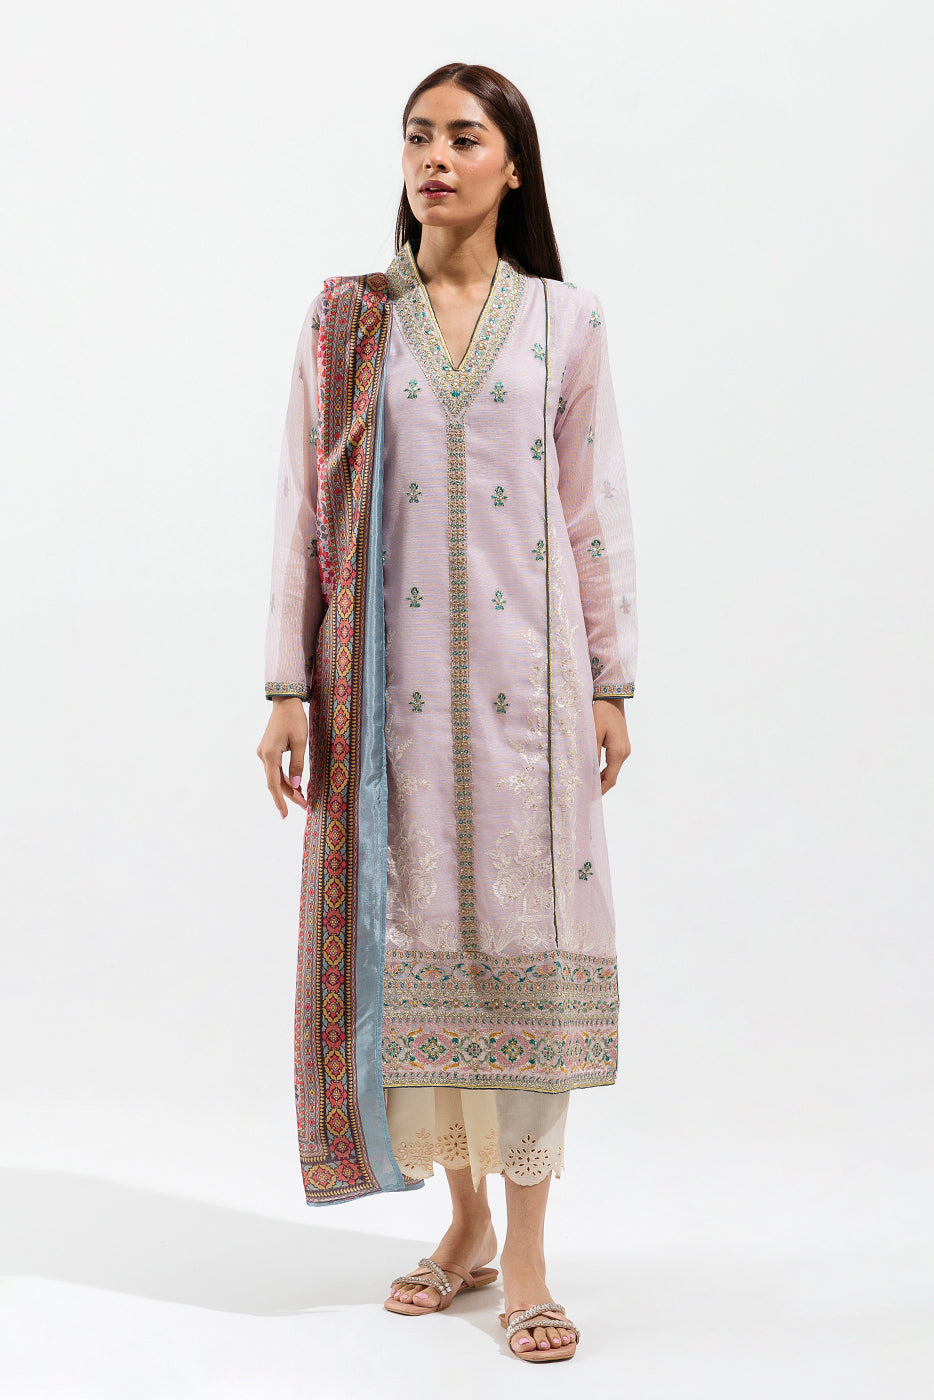 Embroidered Shirt With Dupatta - BEECHTREE